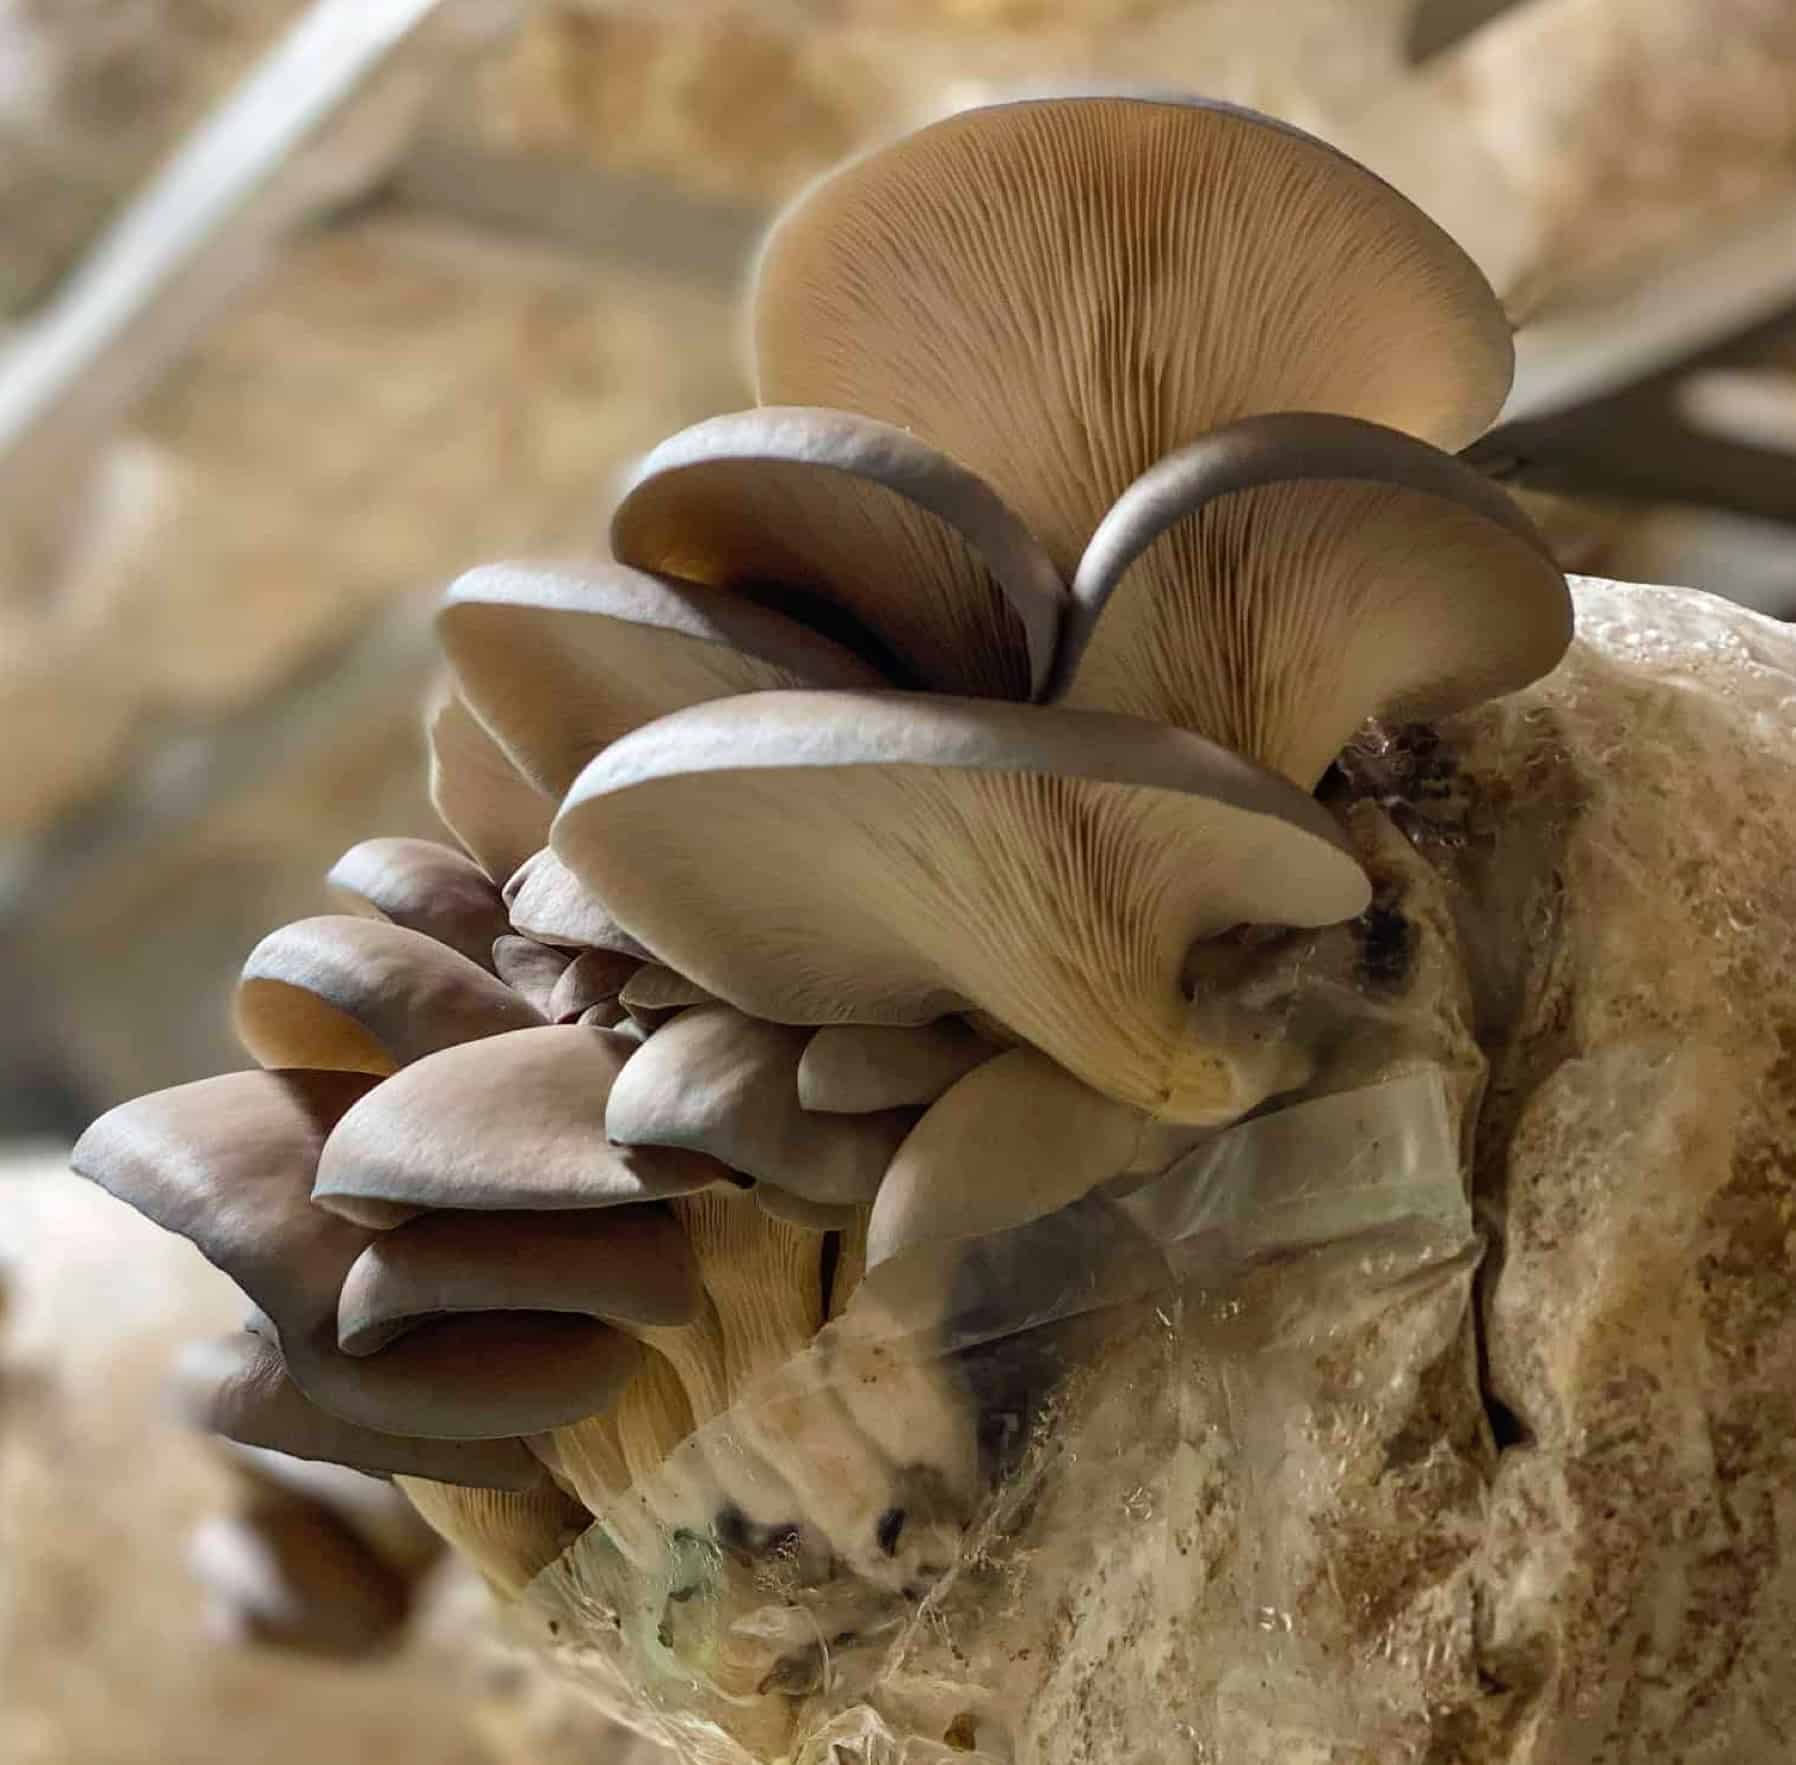 How to Grow Mushrooms – 5 Steps to Success